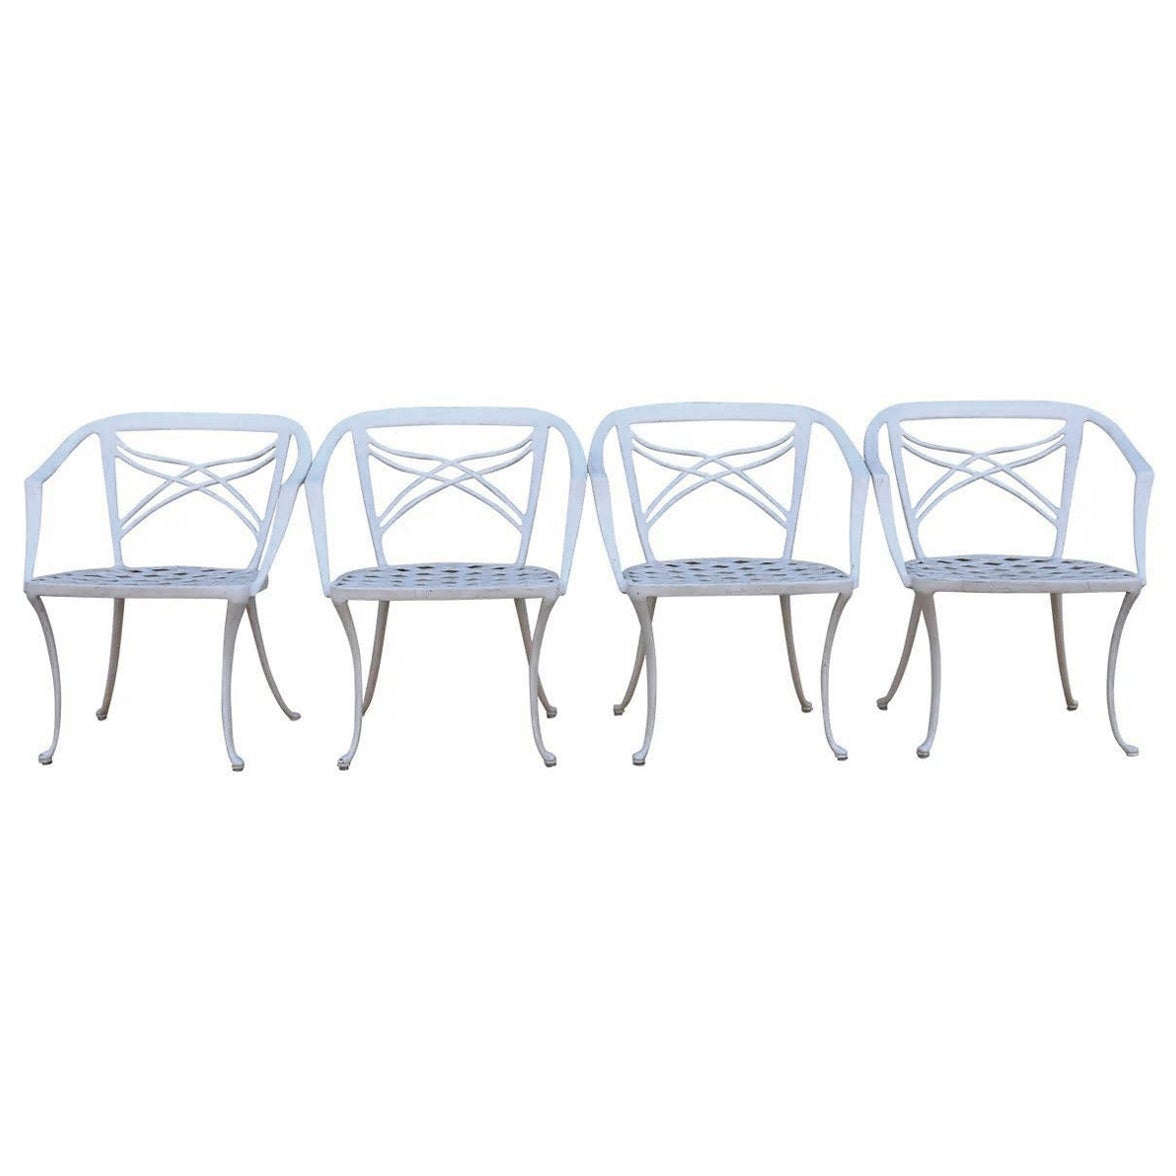 1960s Set of Four Aluminum Patio Chairs by Brown Jordan